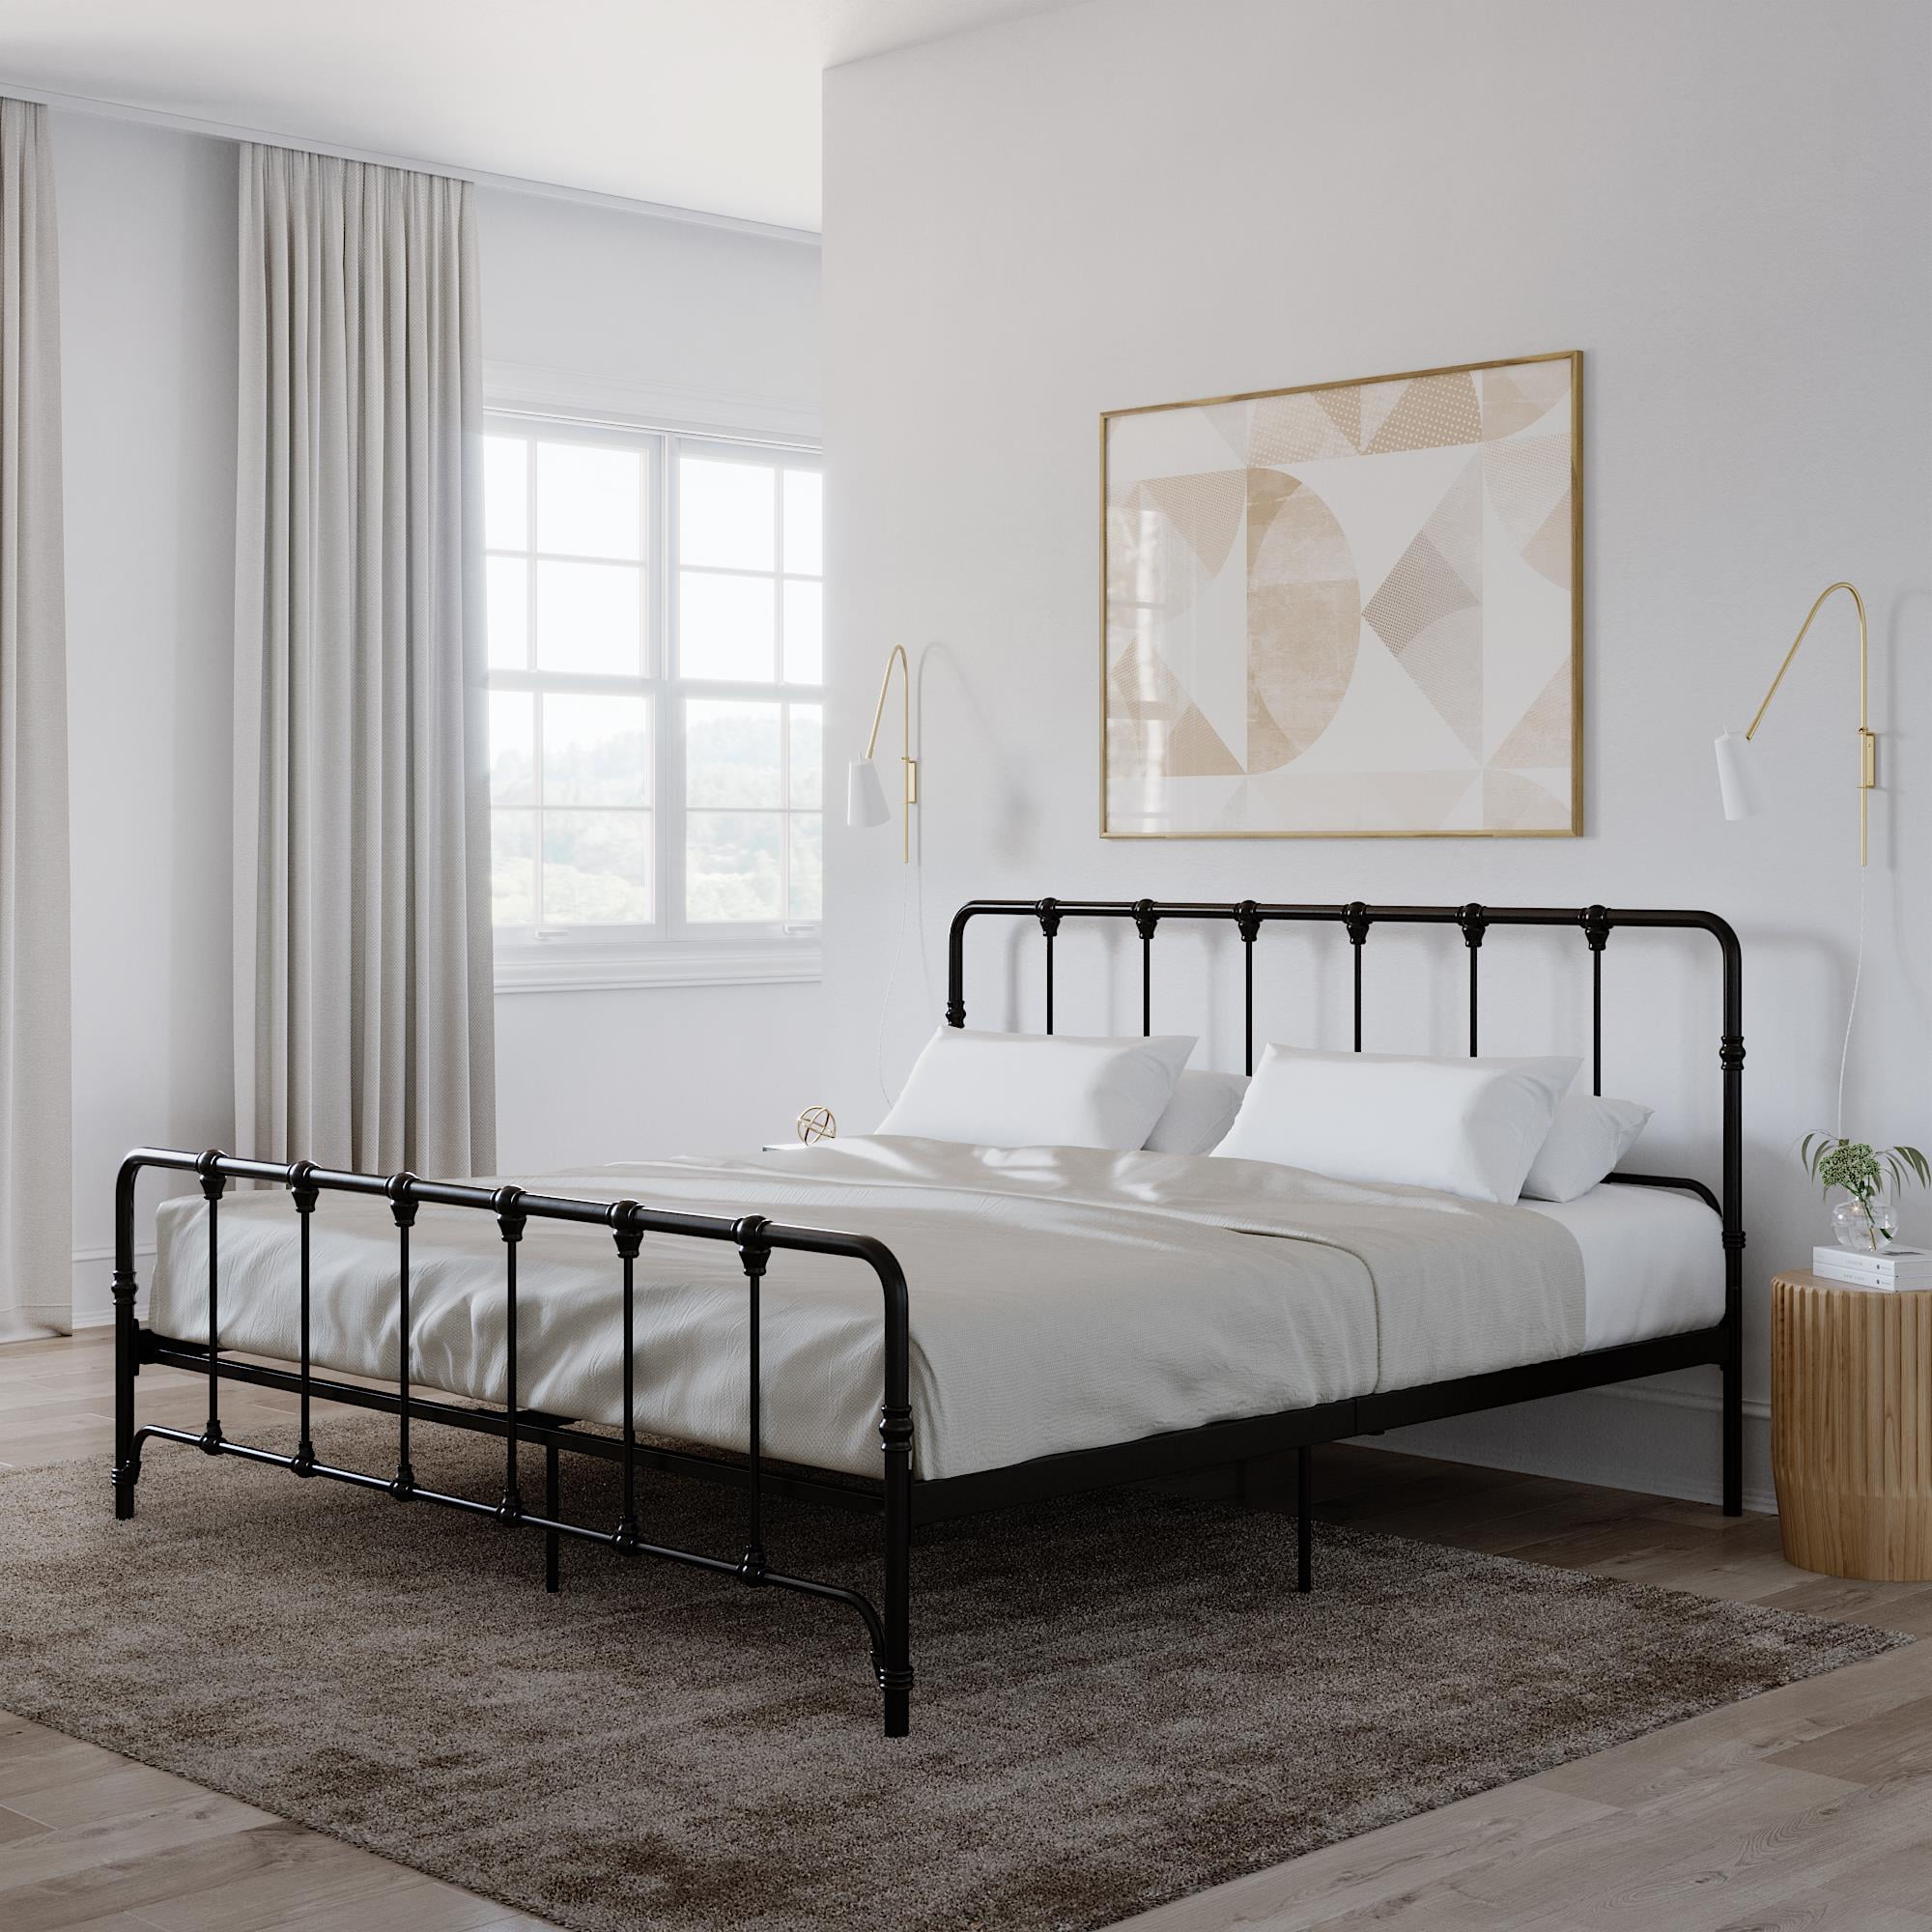 Mainstays Farmhouse Metal Bed King, Black Brass Bed Frame